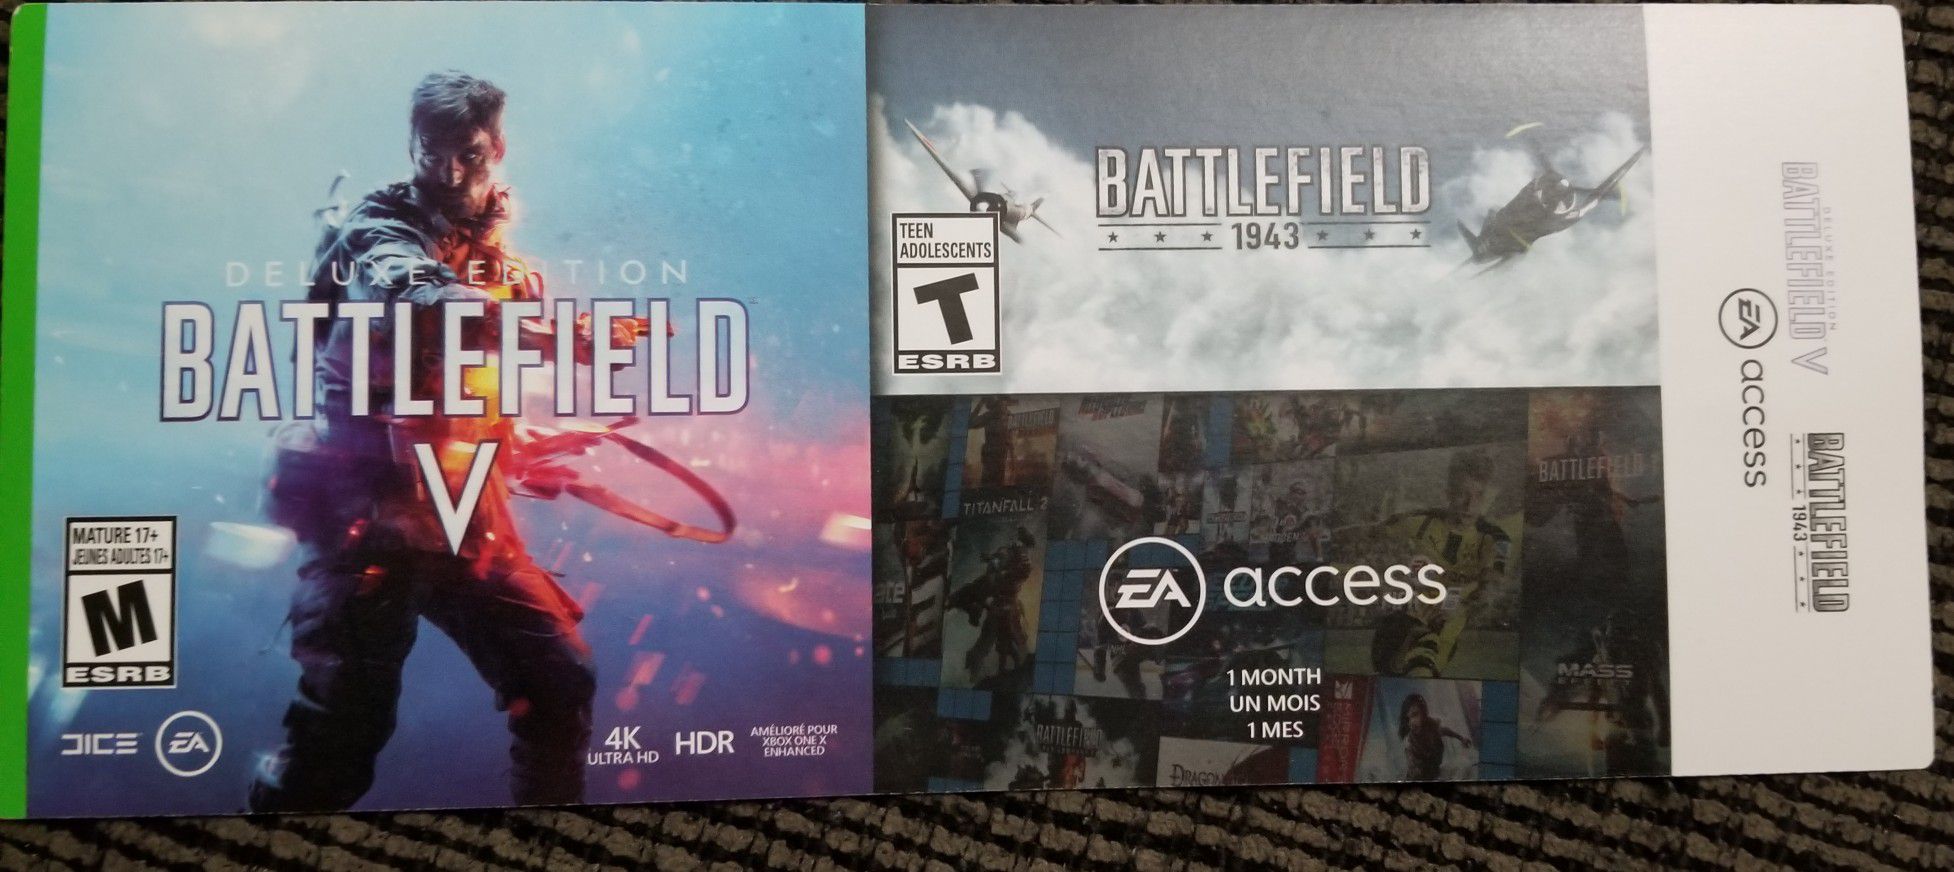 Battlefield 5 Deluxe Edition + BF1943 + 1 MONTH GAME PASS DIGITAL